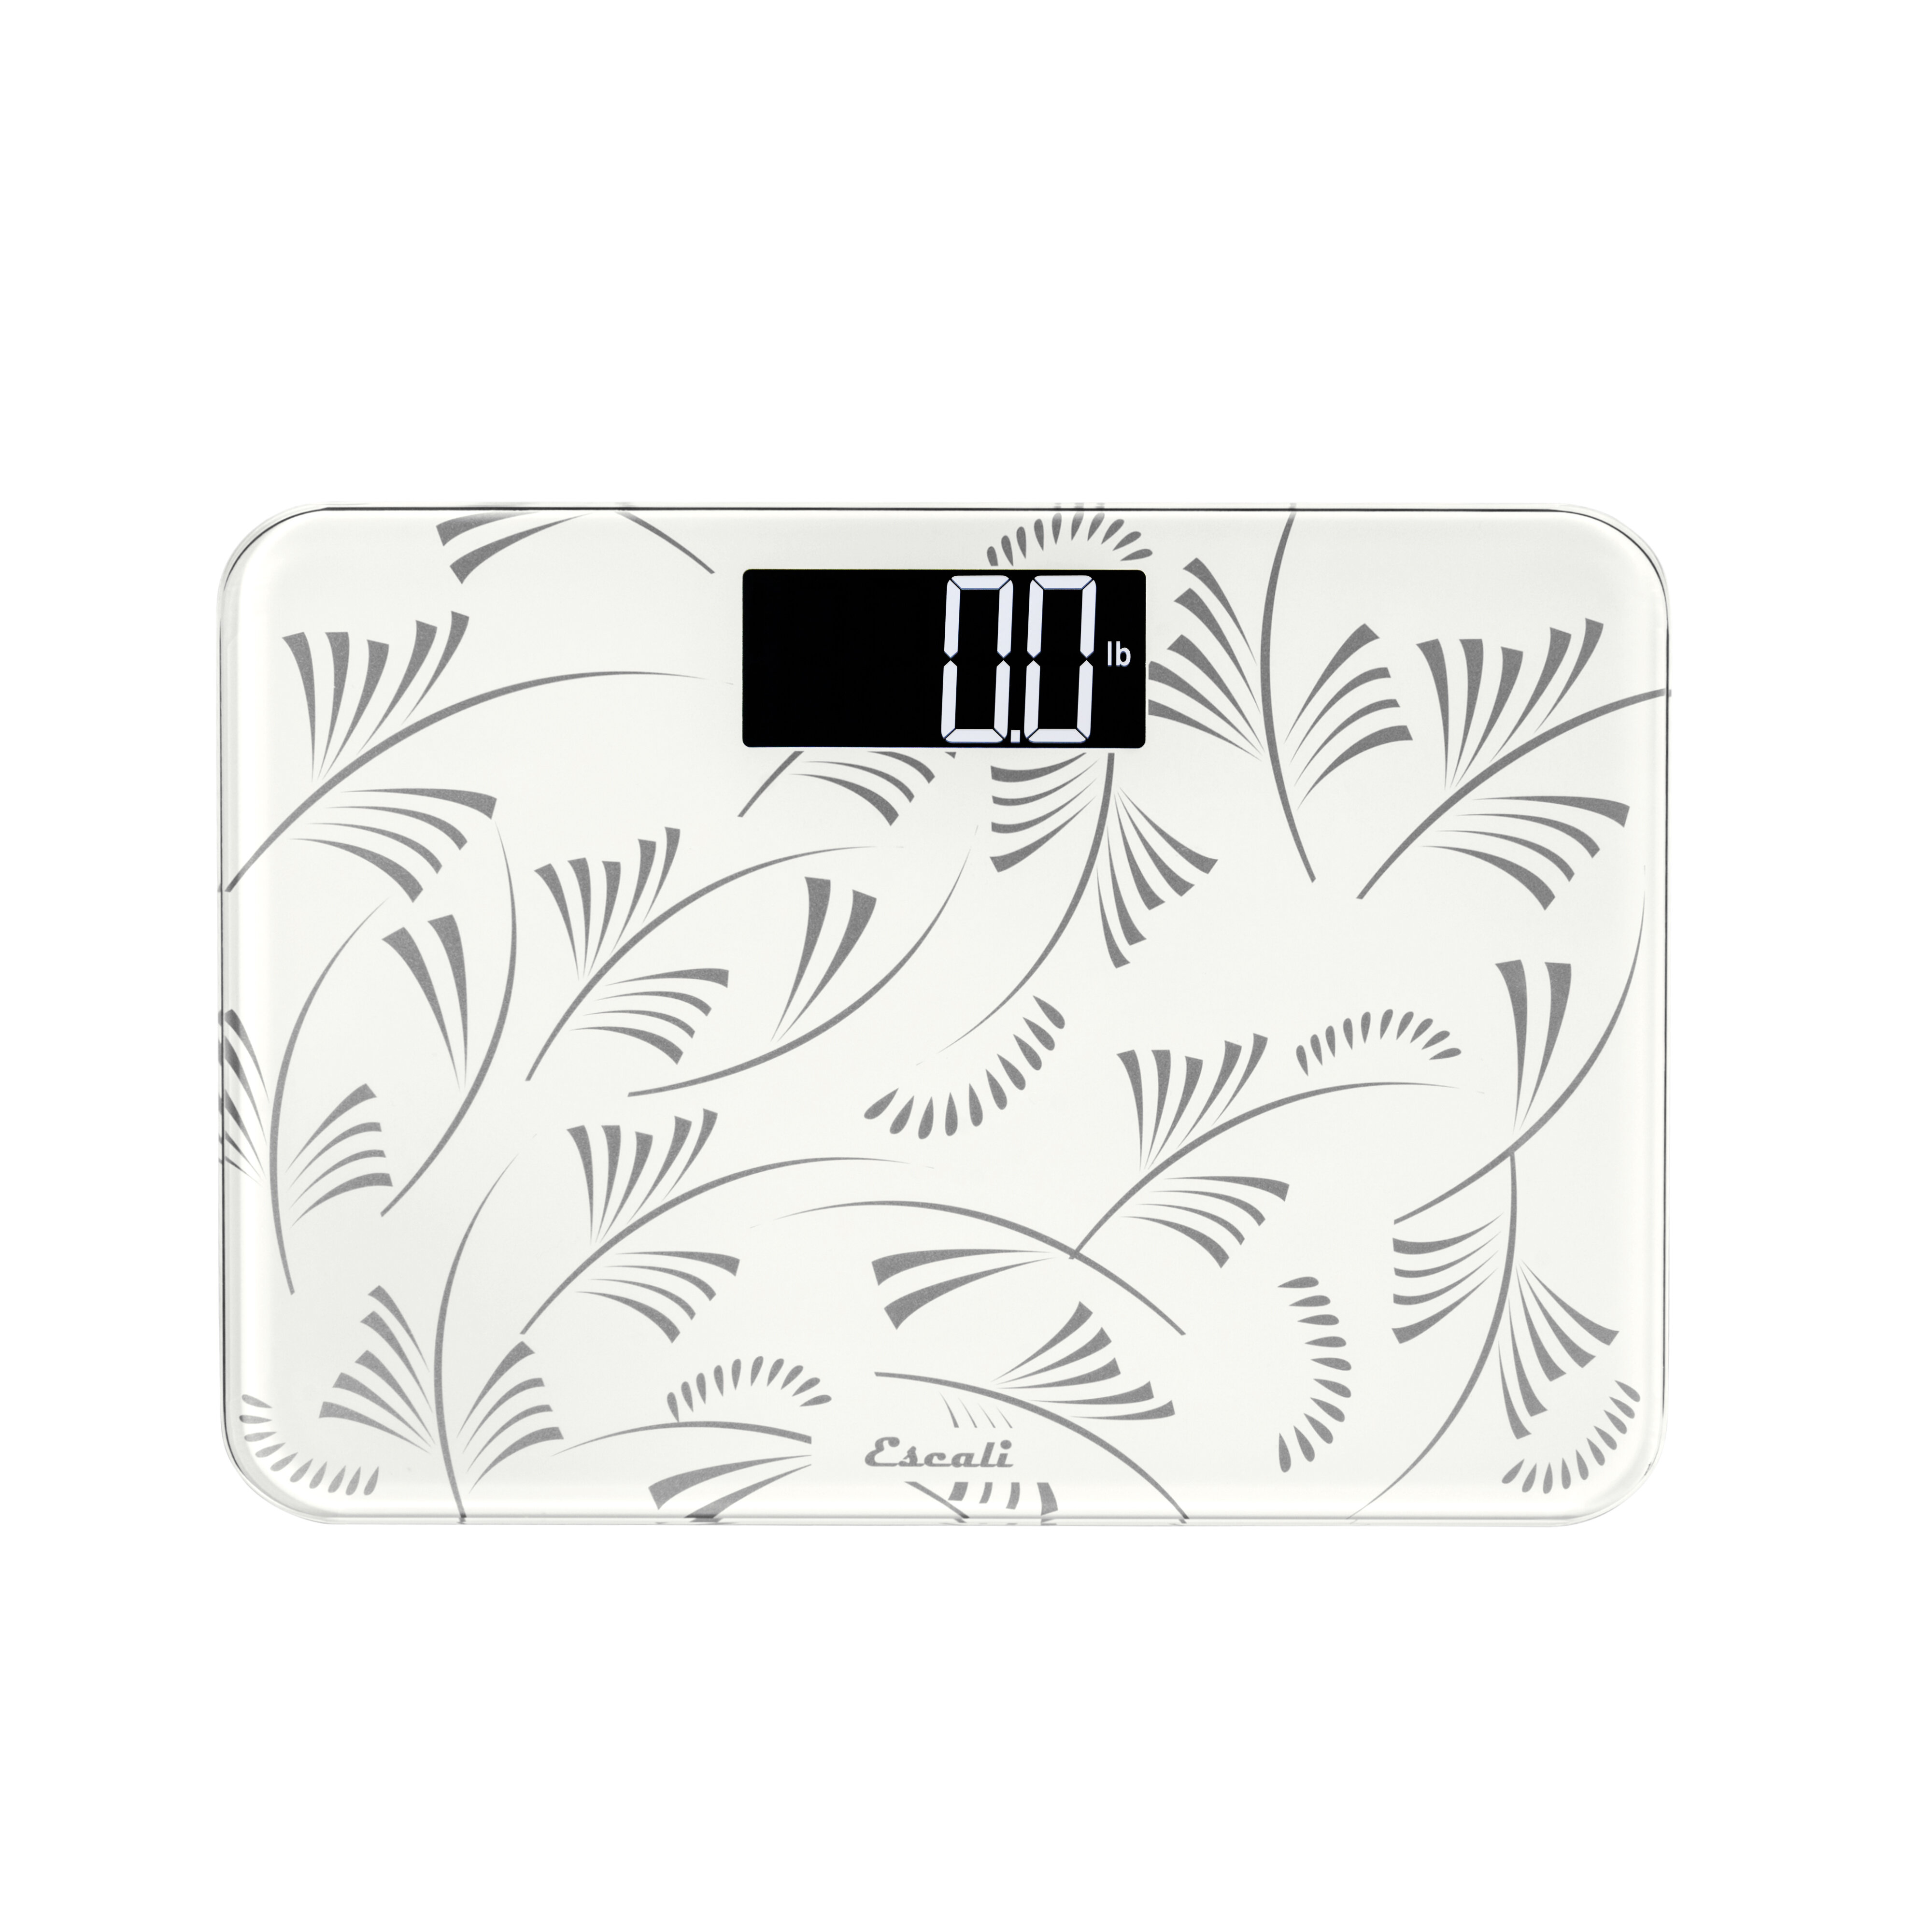 Escali Extra Large Display Digital Bathroom Scale for Body Weight with  Easy-to-Read Display and Non-Slip Platform, Extra-High Capacity of 440 lb